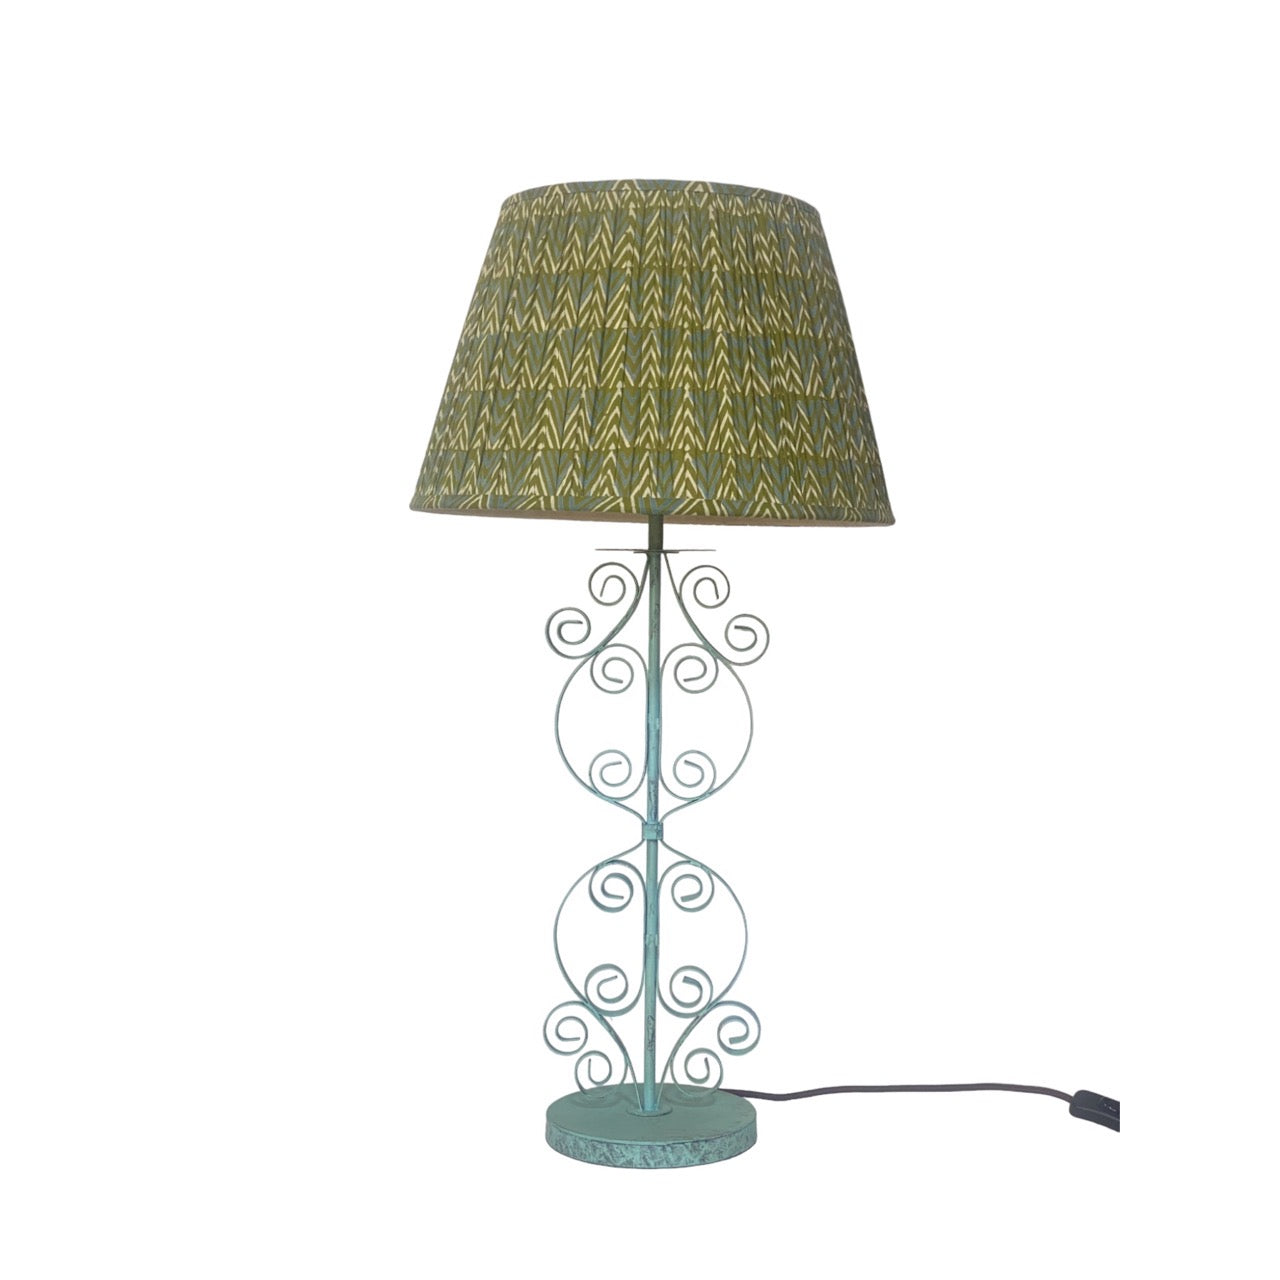 Manali table lamp with Green chevron lampshade